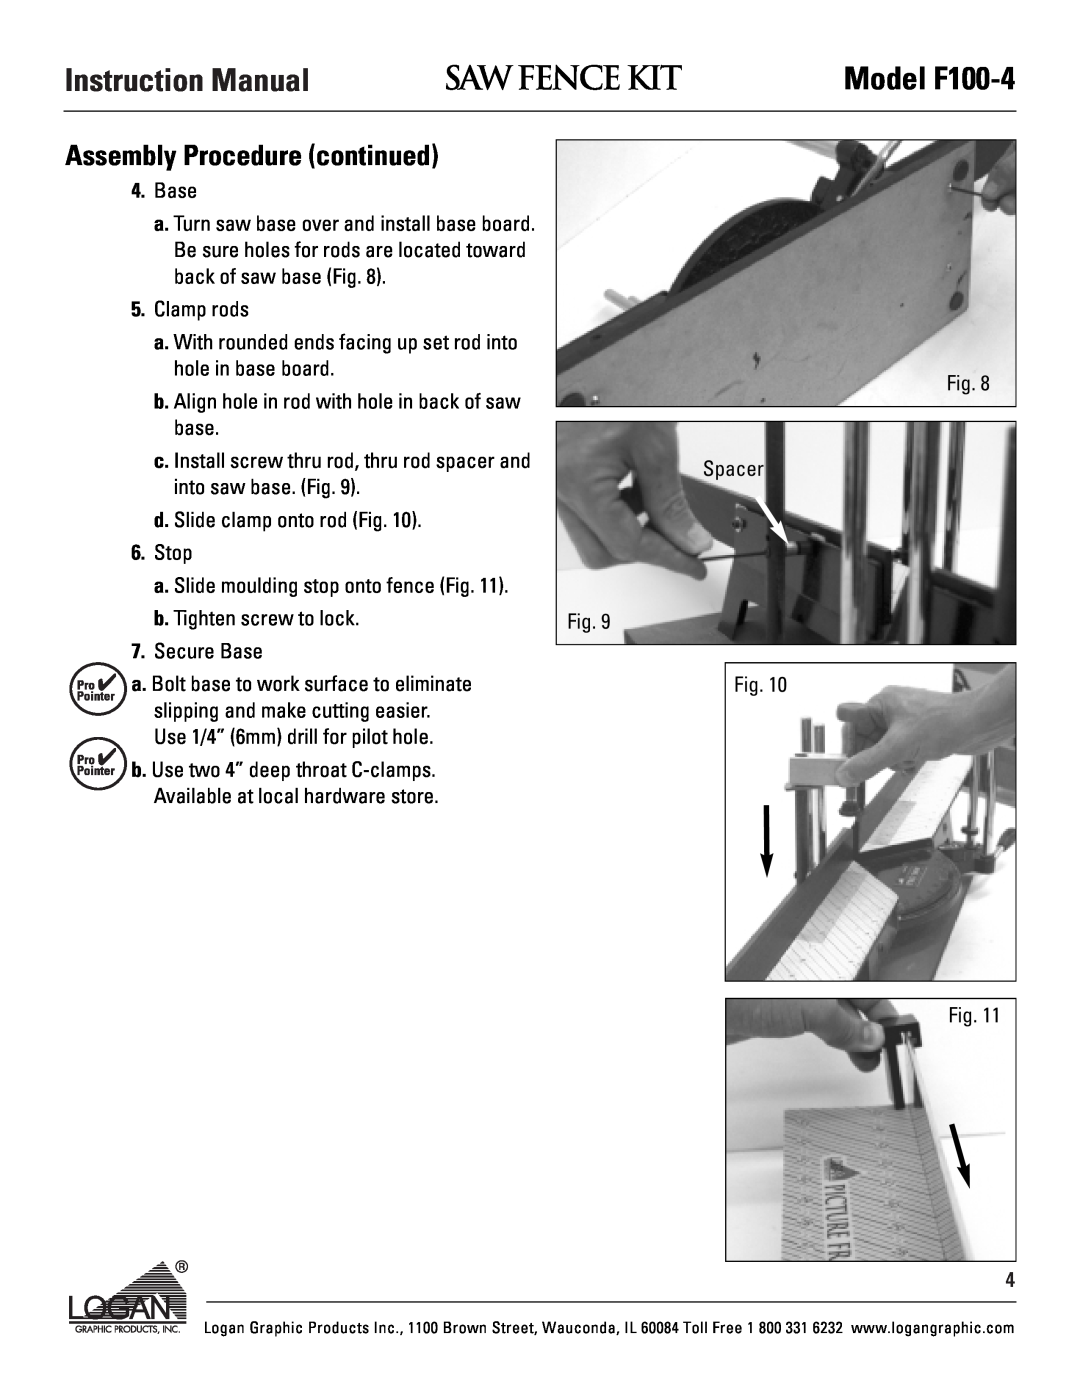 Logan Graphic Products instruction manual Assembly Procedure continued, Saw Fence Kit, Model F100-4 